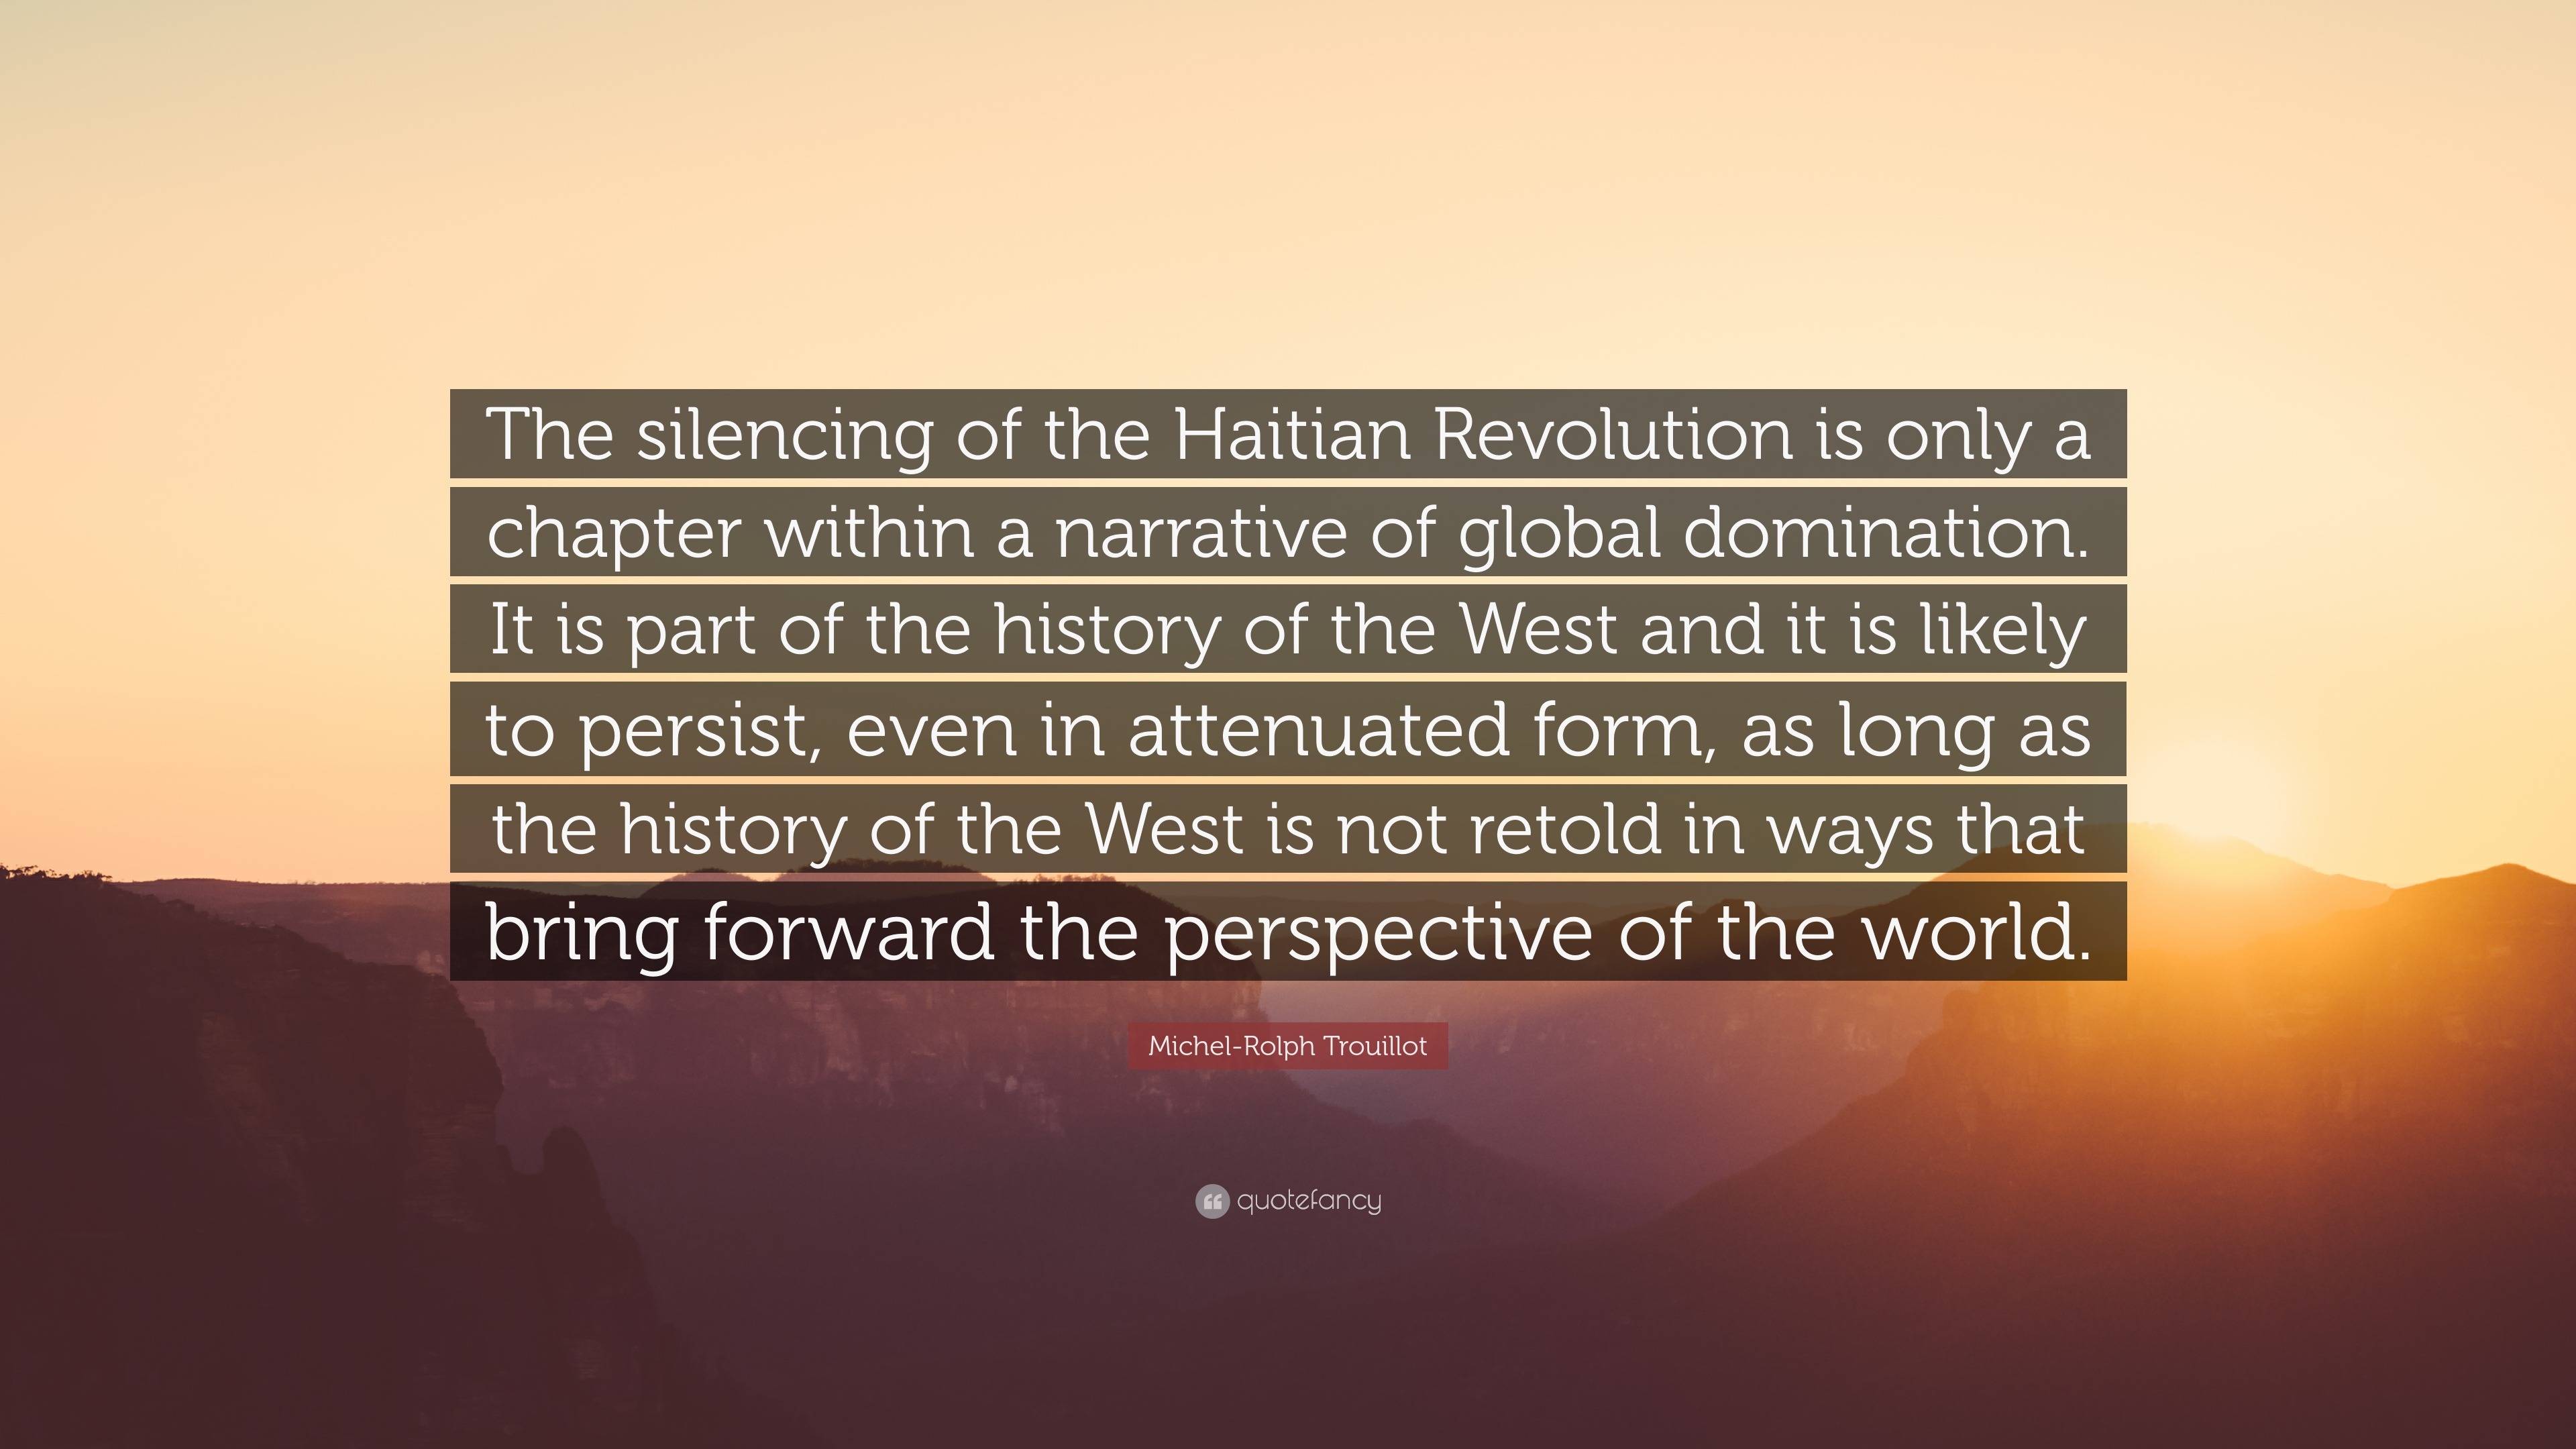 Michel-Rolph Trouillot Quote: “The silencing of the Haitian Revolution